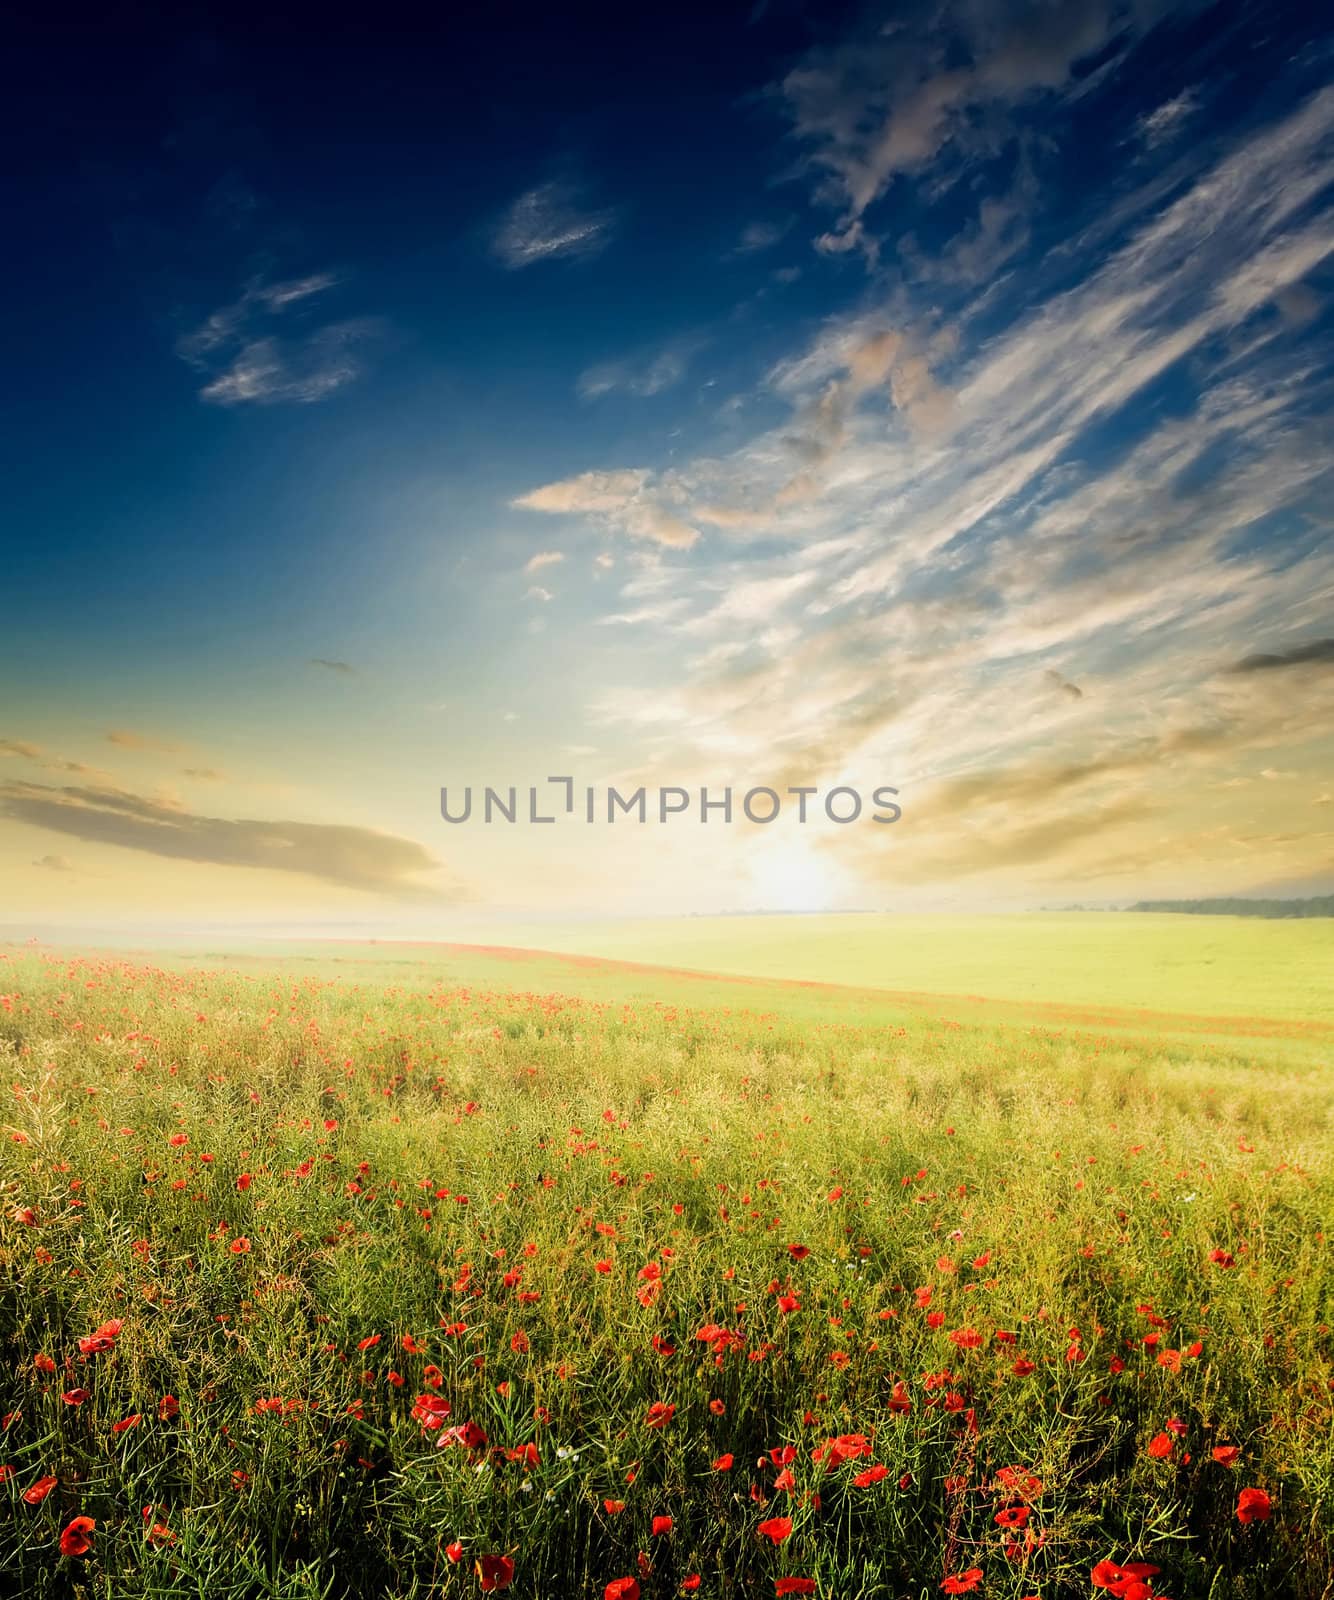 An image of beautiful field of poppies